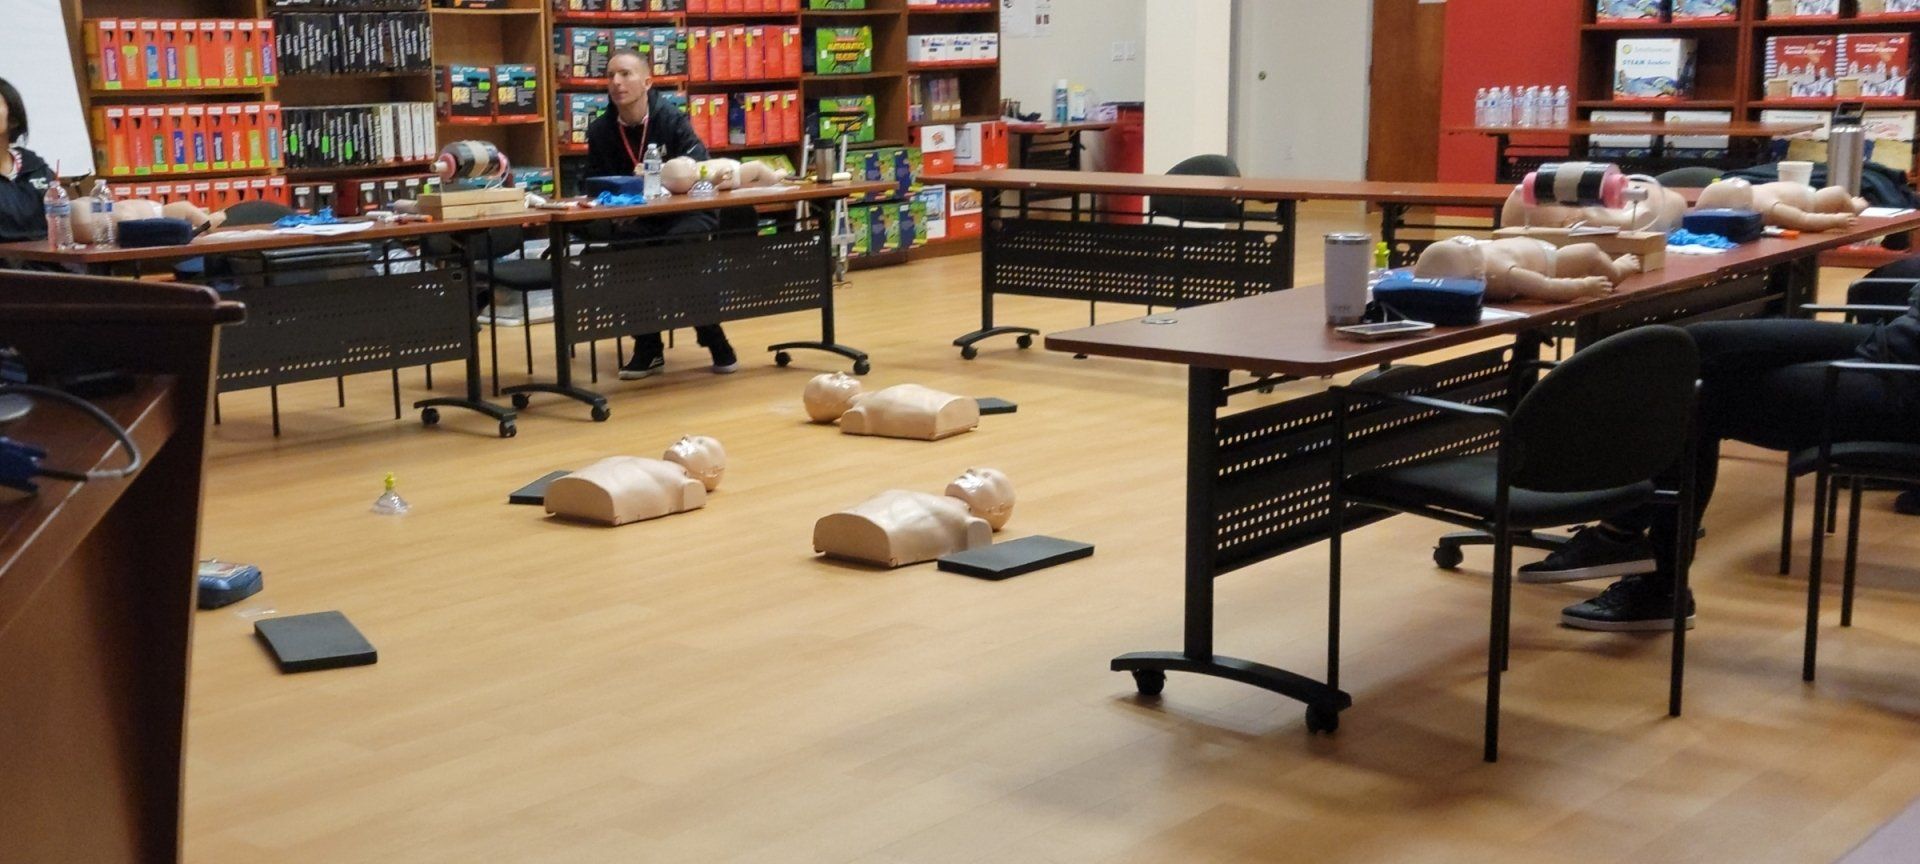 First Aid/CPR Class with Targeted CPR